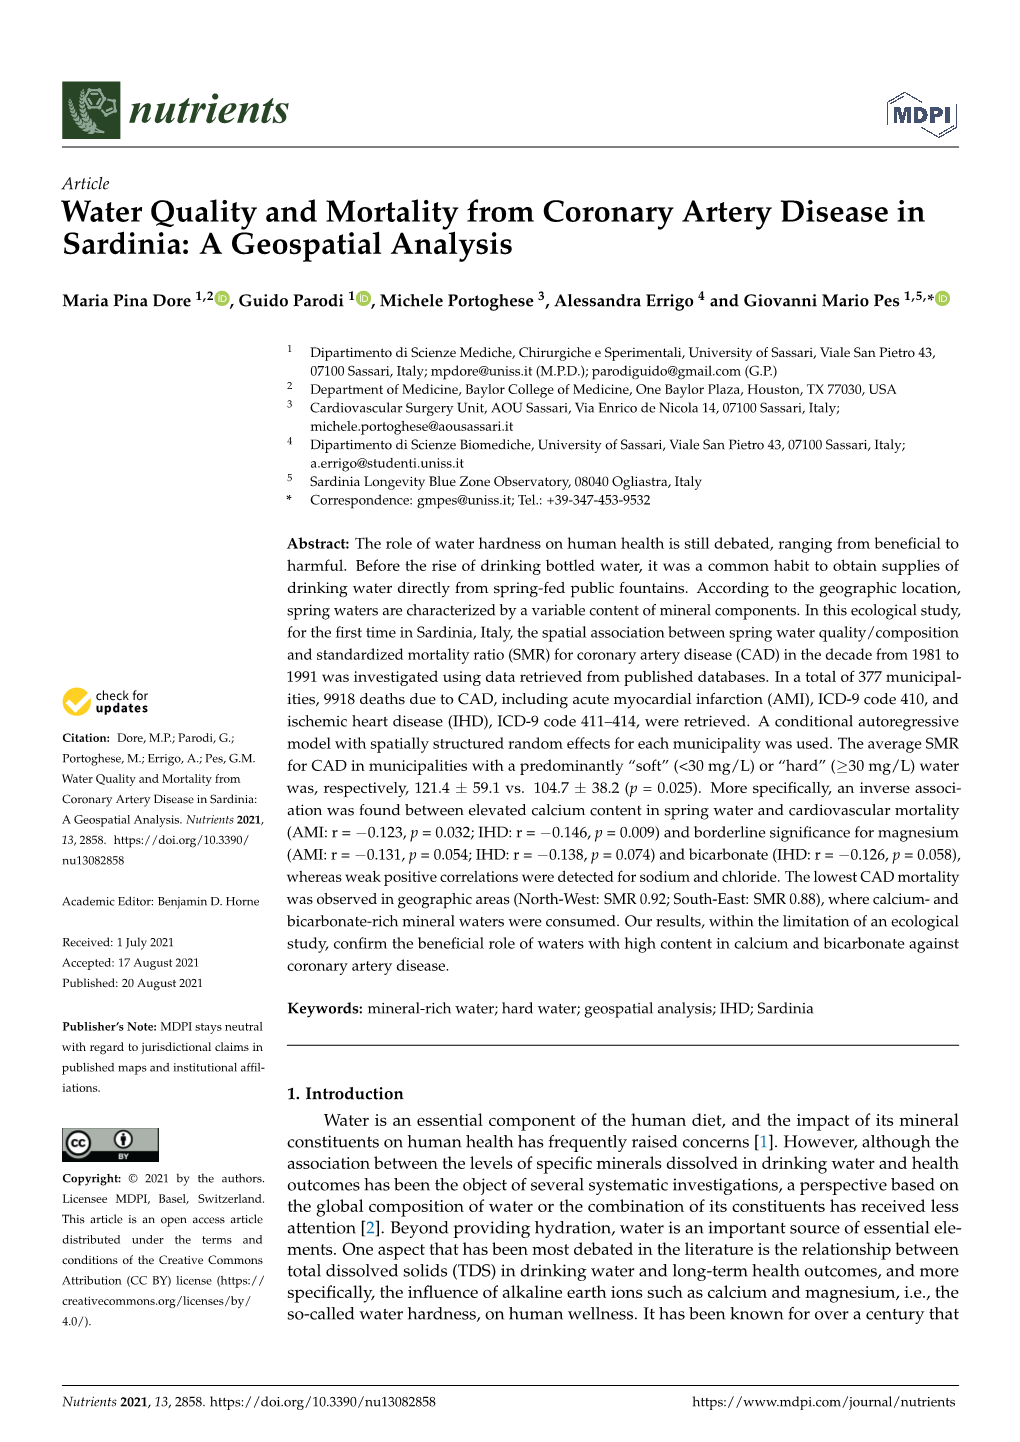 Water Quality and Mortality from Coronary Artery Disease in Sardinia: a Geospatial Analysis